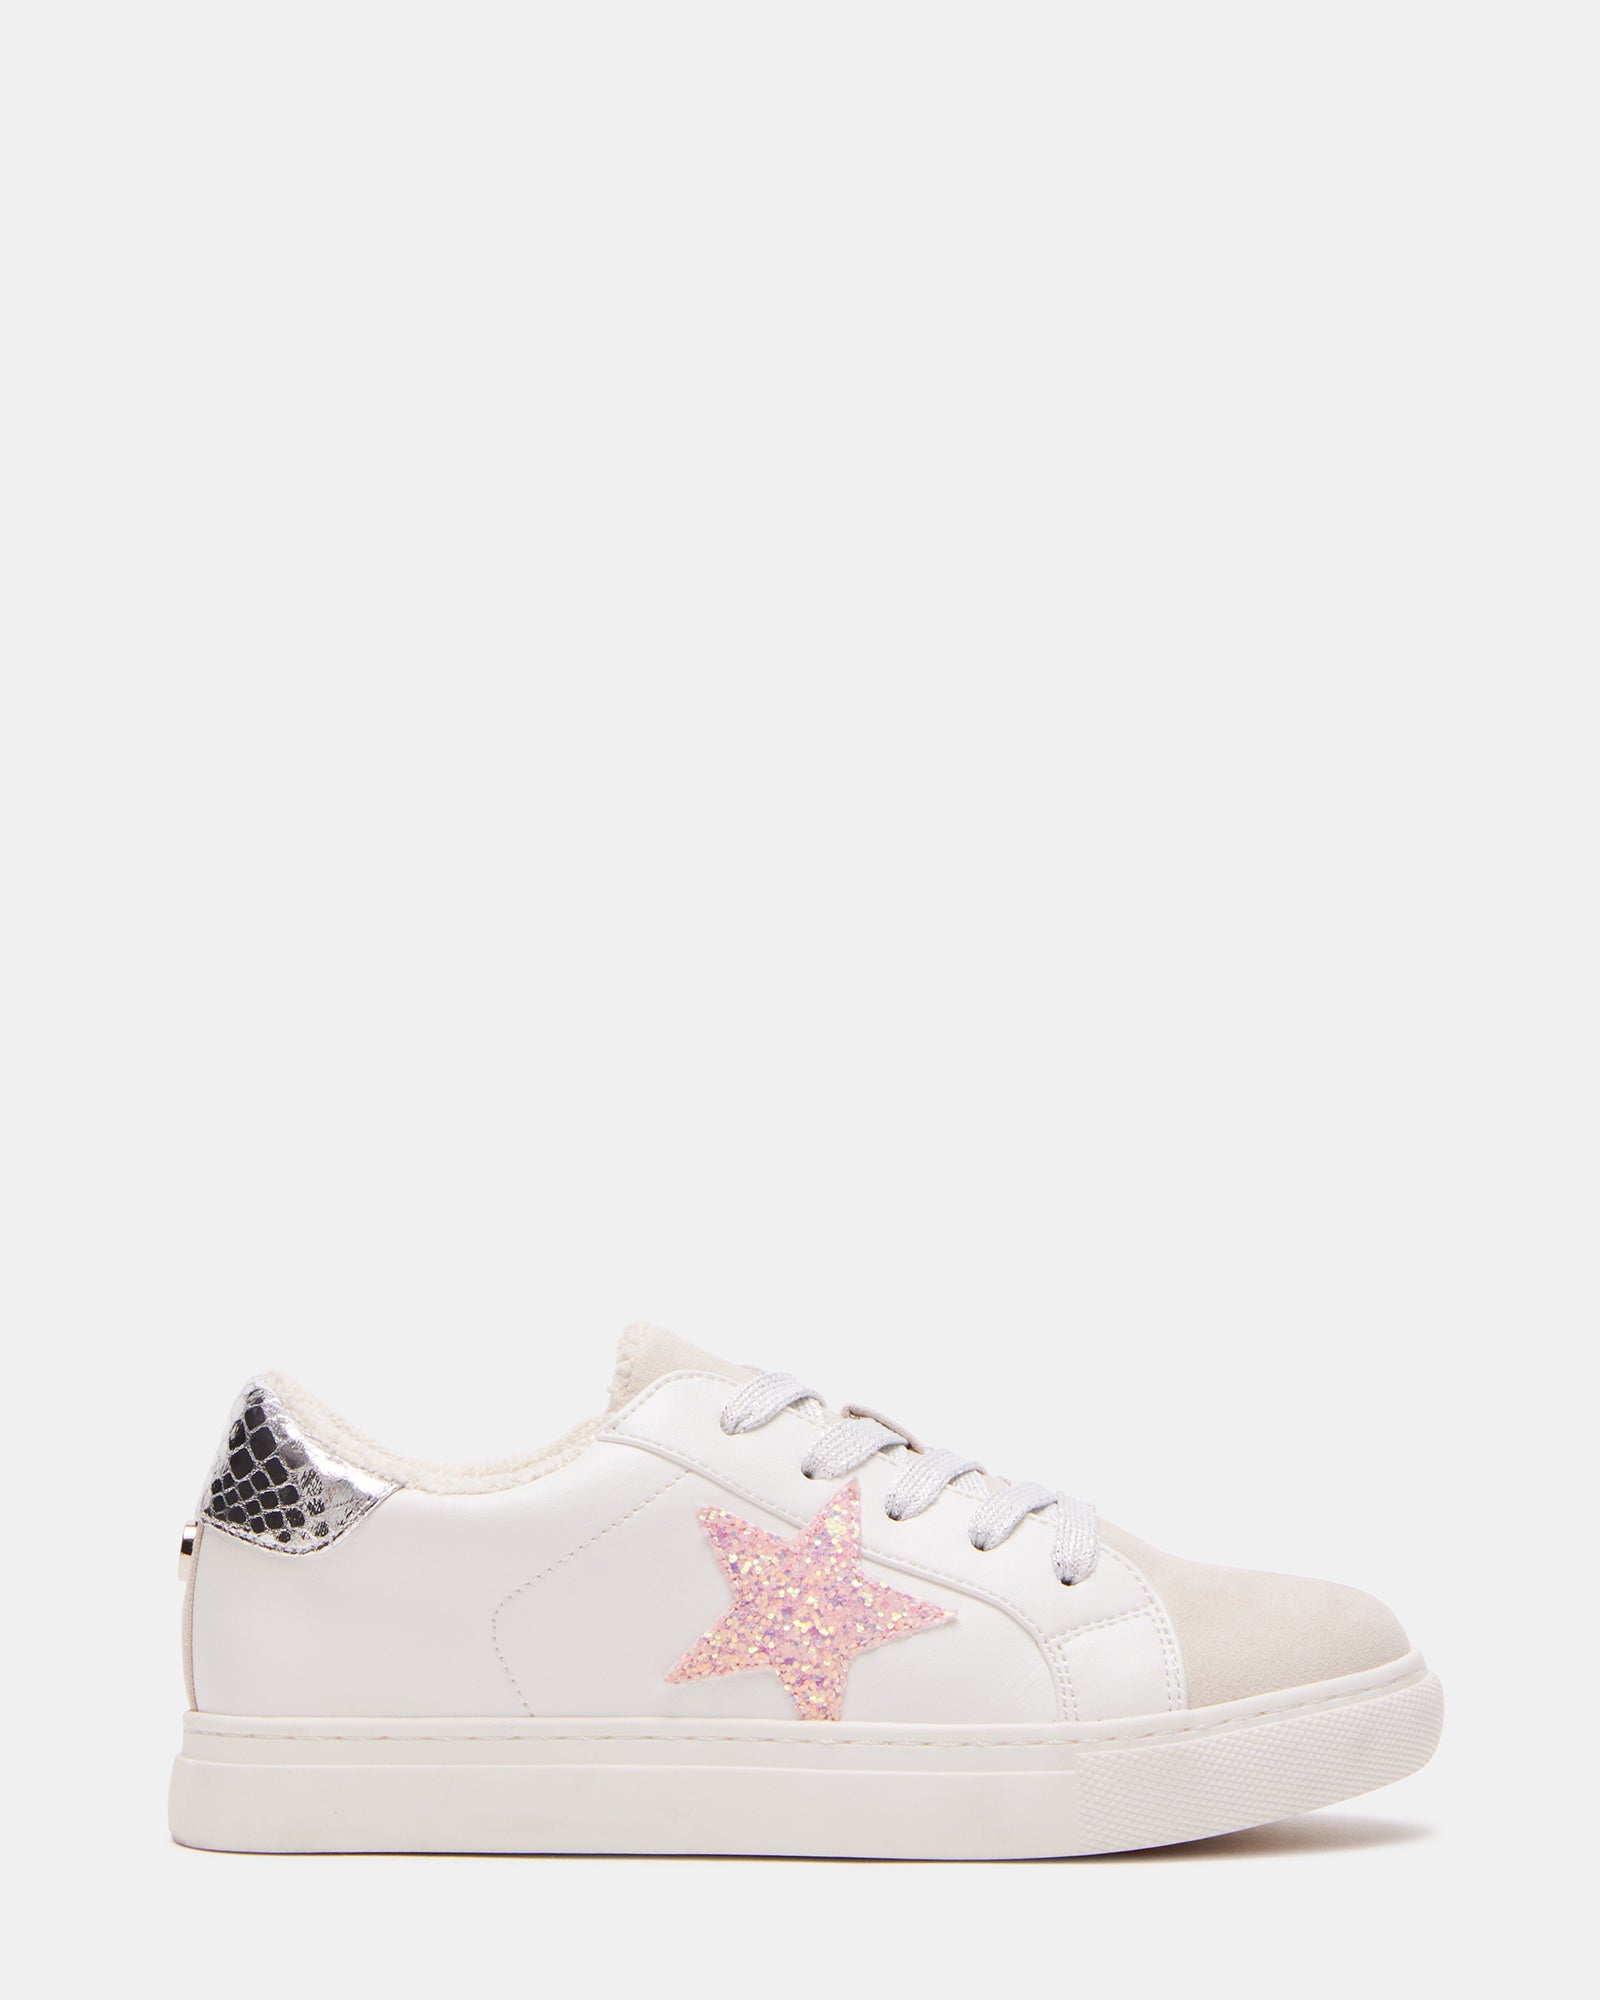 Kids' REZUME White Multi Lace-Up Star Sneakers | Girls' Shoes